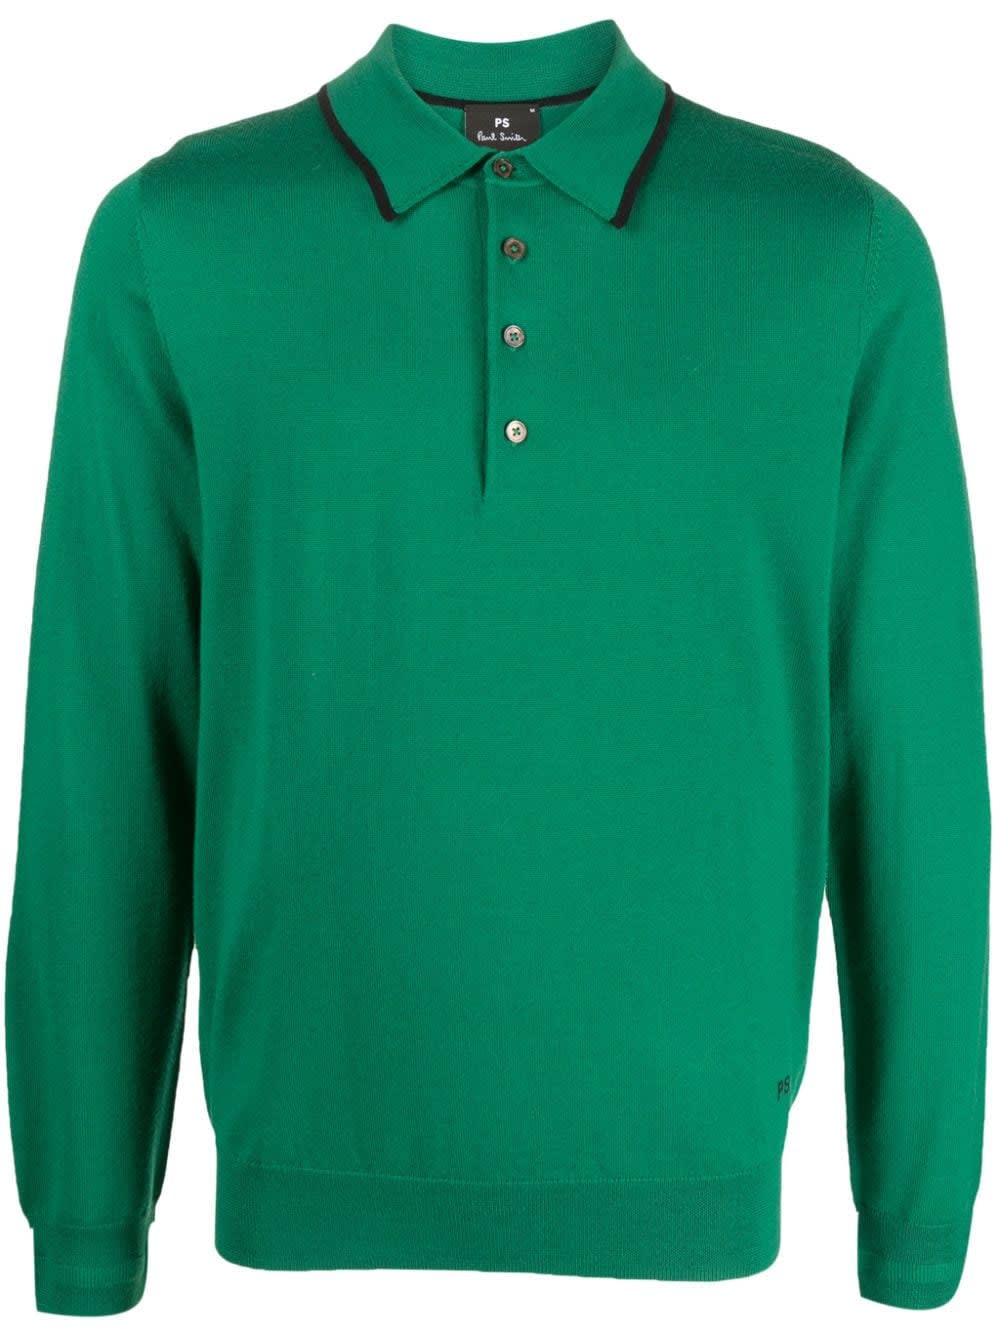 Mens Sweater Long Sleeves Polo